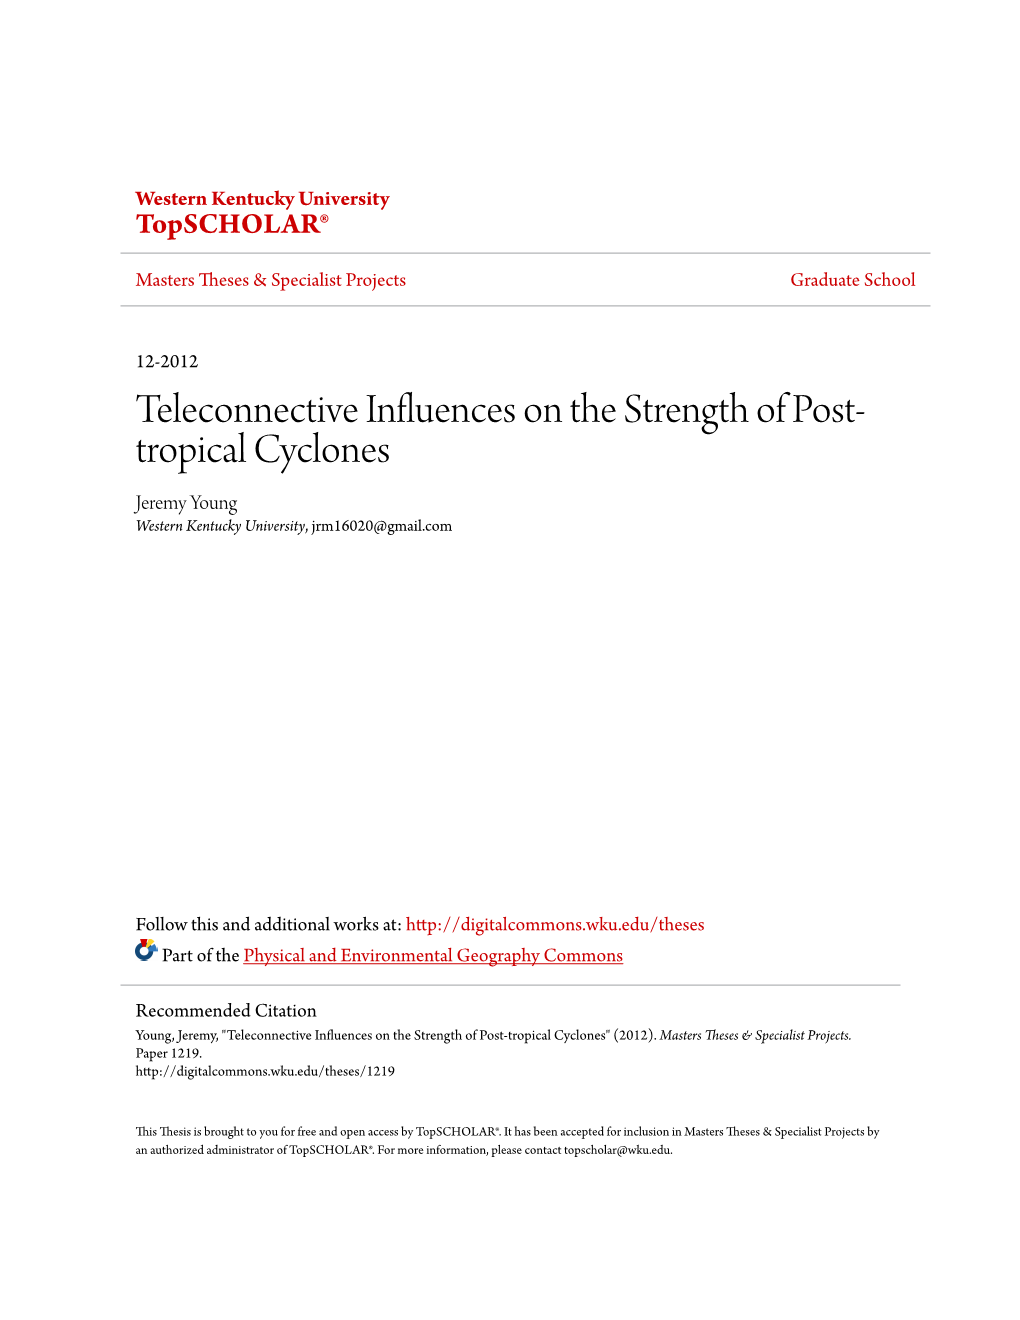 Teleconnective Influences on the Strength of Post-Tropical Cyclones" (2012)